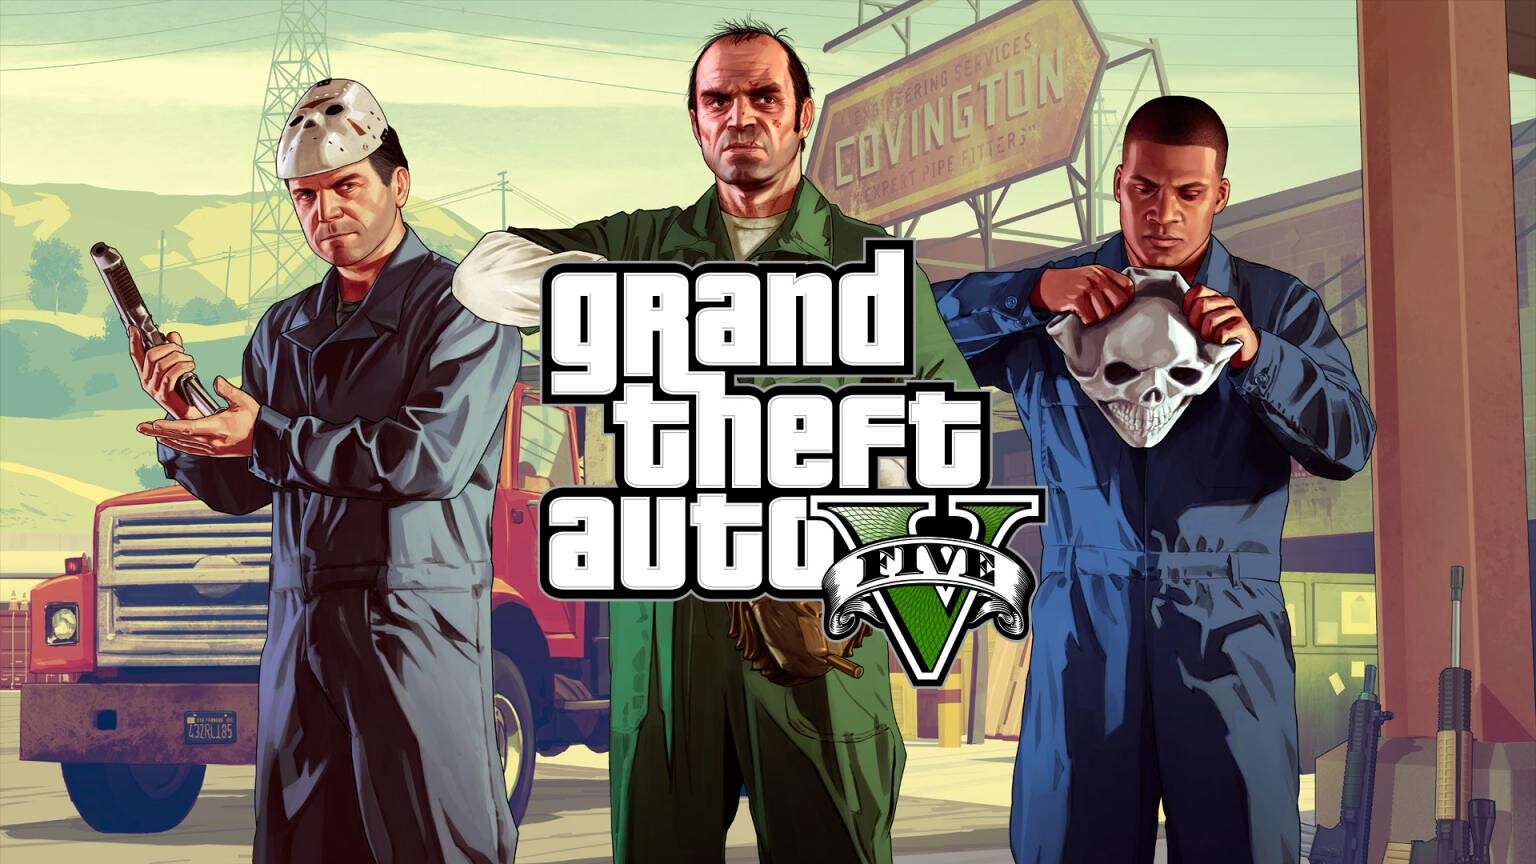 Grand Theft Auto V Premium Edition Free at Epic Games Store - Urbantechnoobs